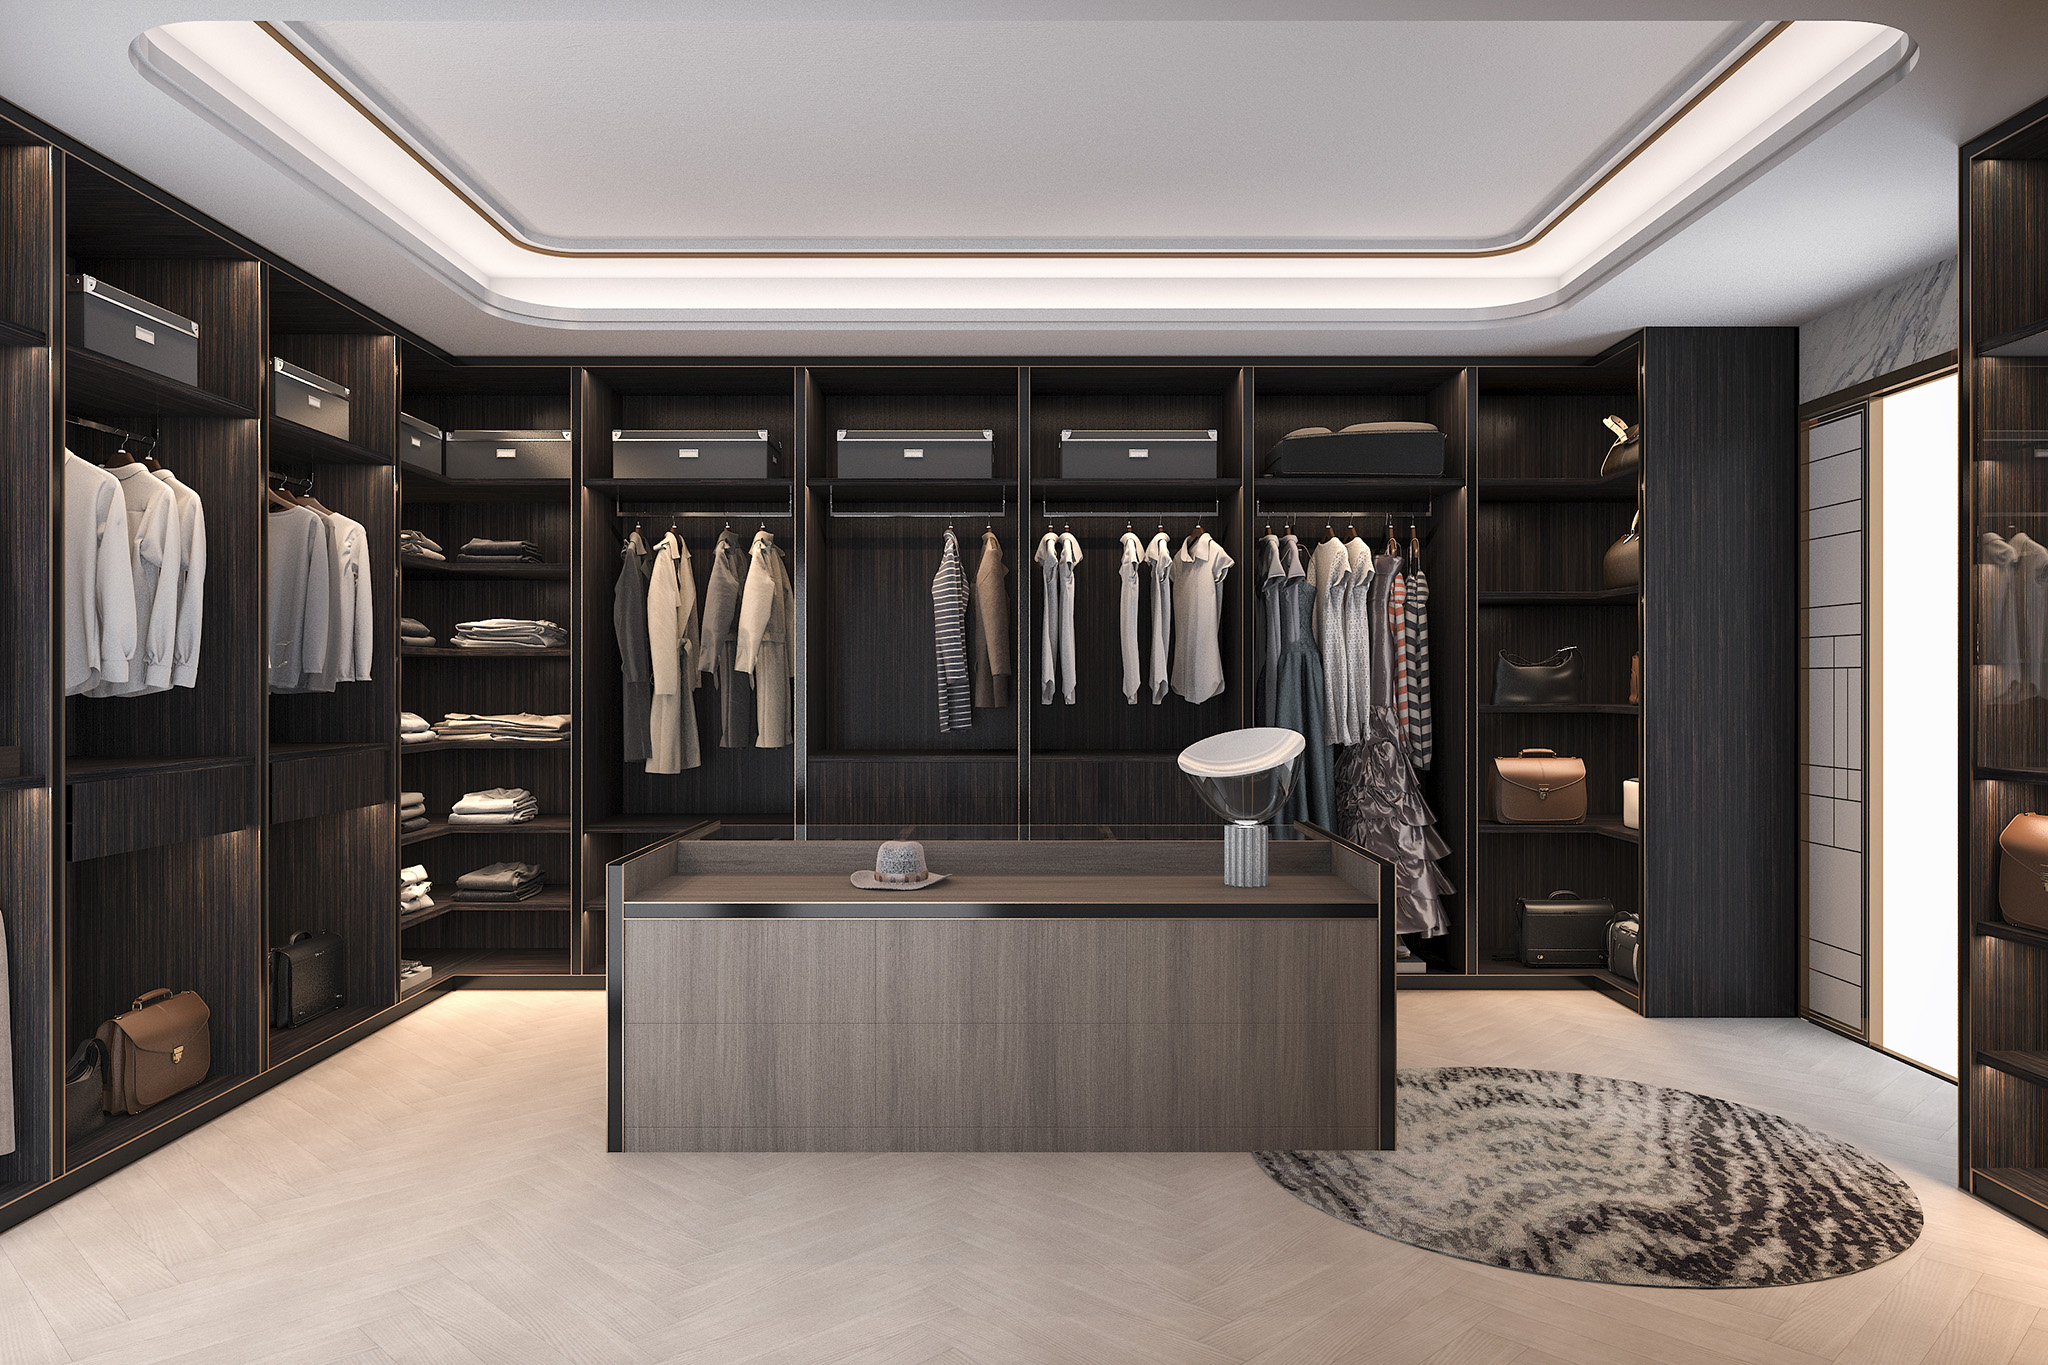 https://www.fittedwardrobesideas.com/wp-content/uploads/2019/09/Fitted-Wardrobes-Ideas-Dressing-Room-11.jpg